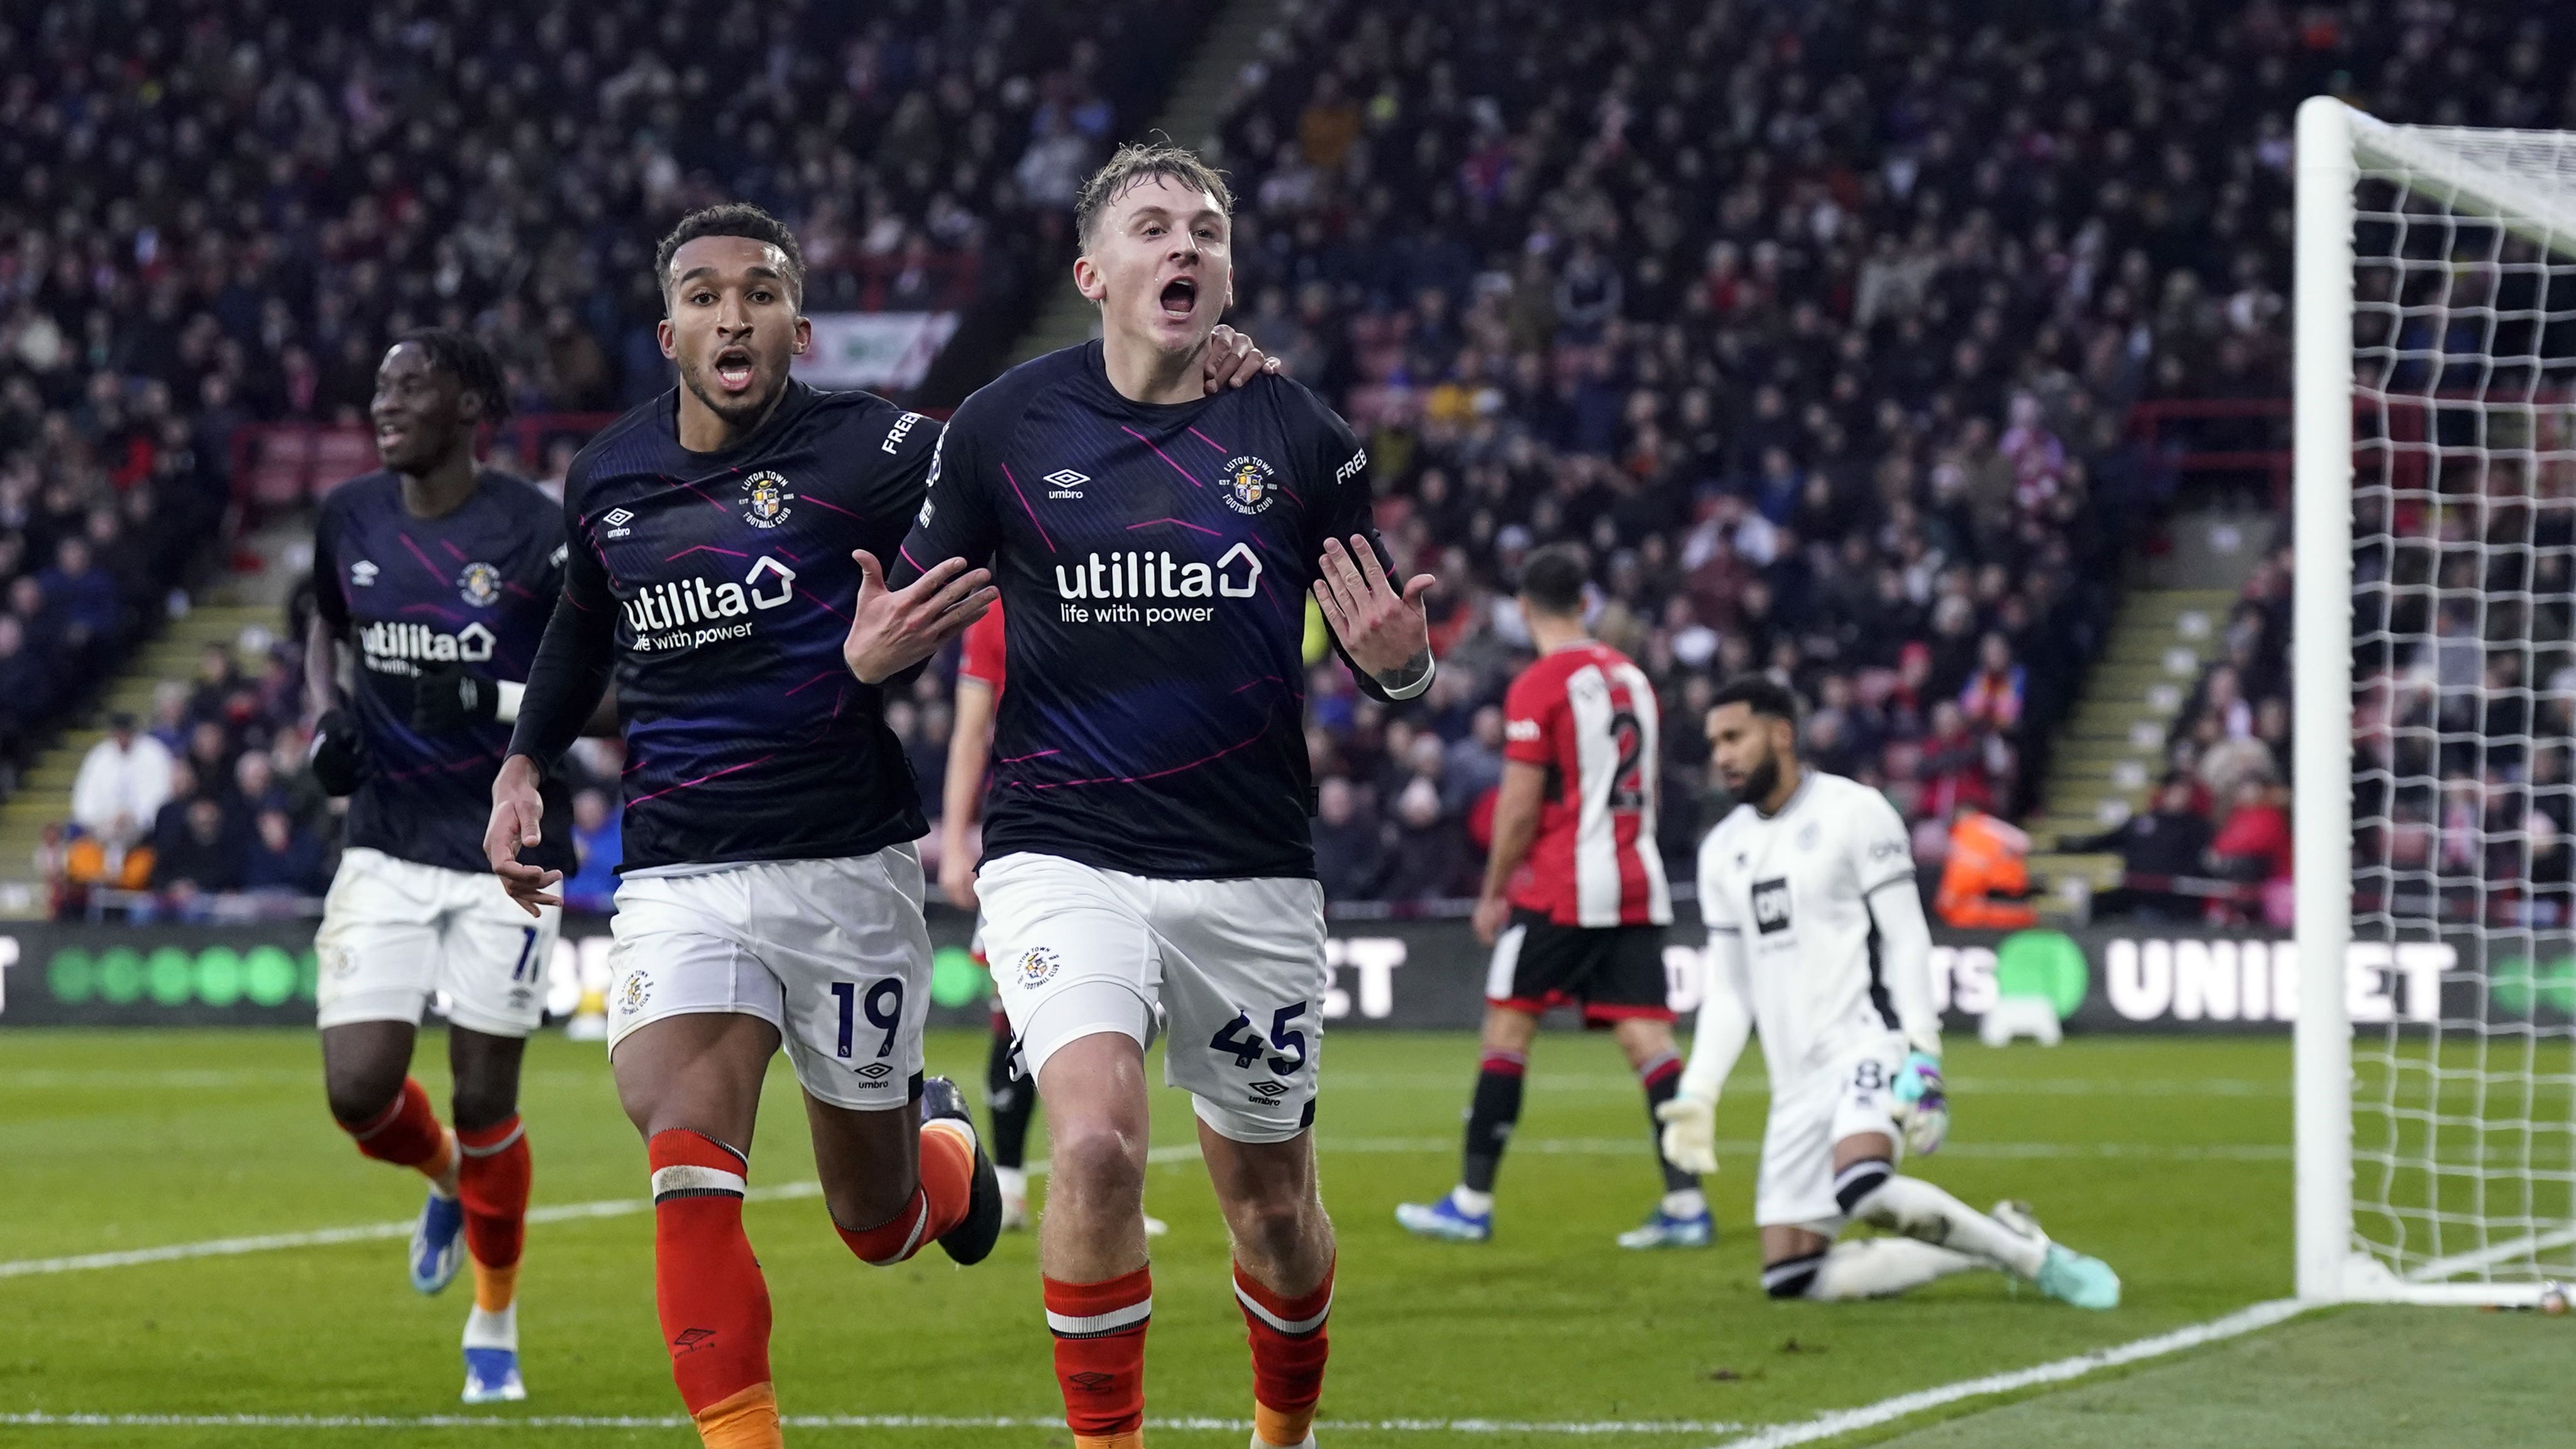 Luton stage late comeback to claim important victory at Sheffield United